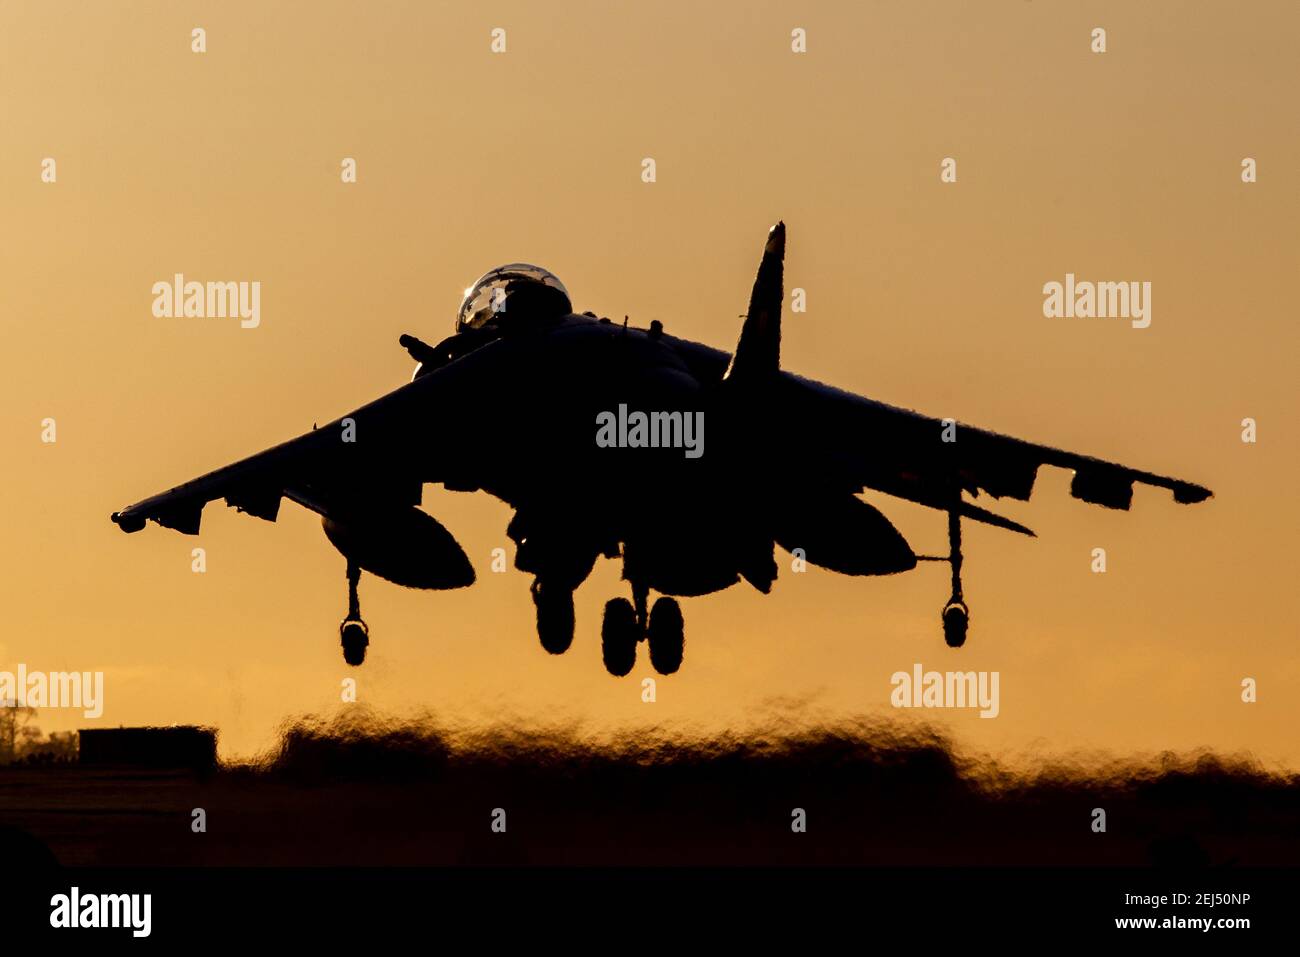 Harrier fighter bomber silhouette landing at sunset with an orange sky Stock Photo